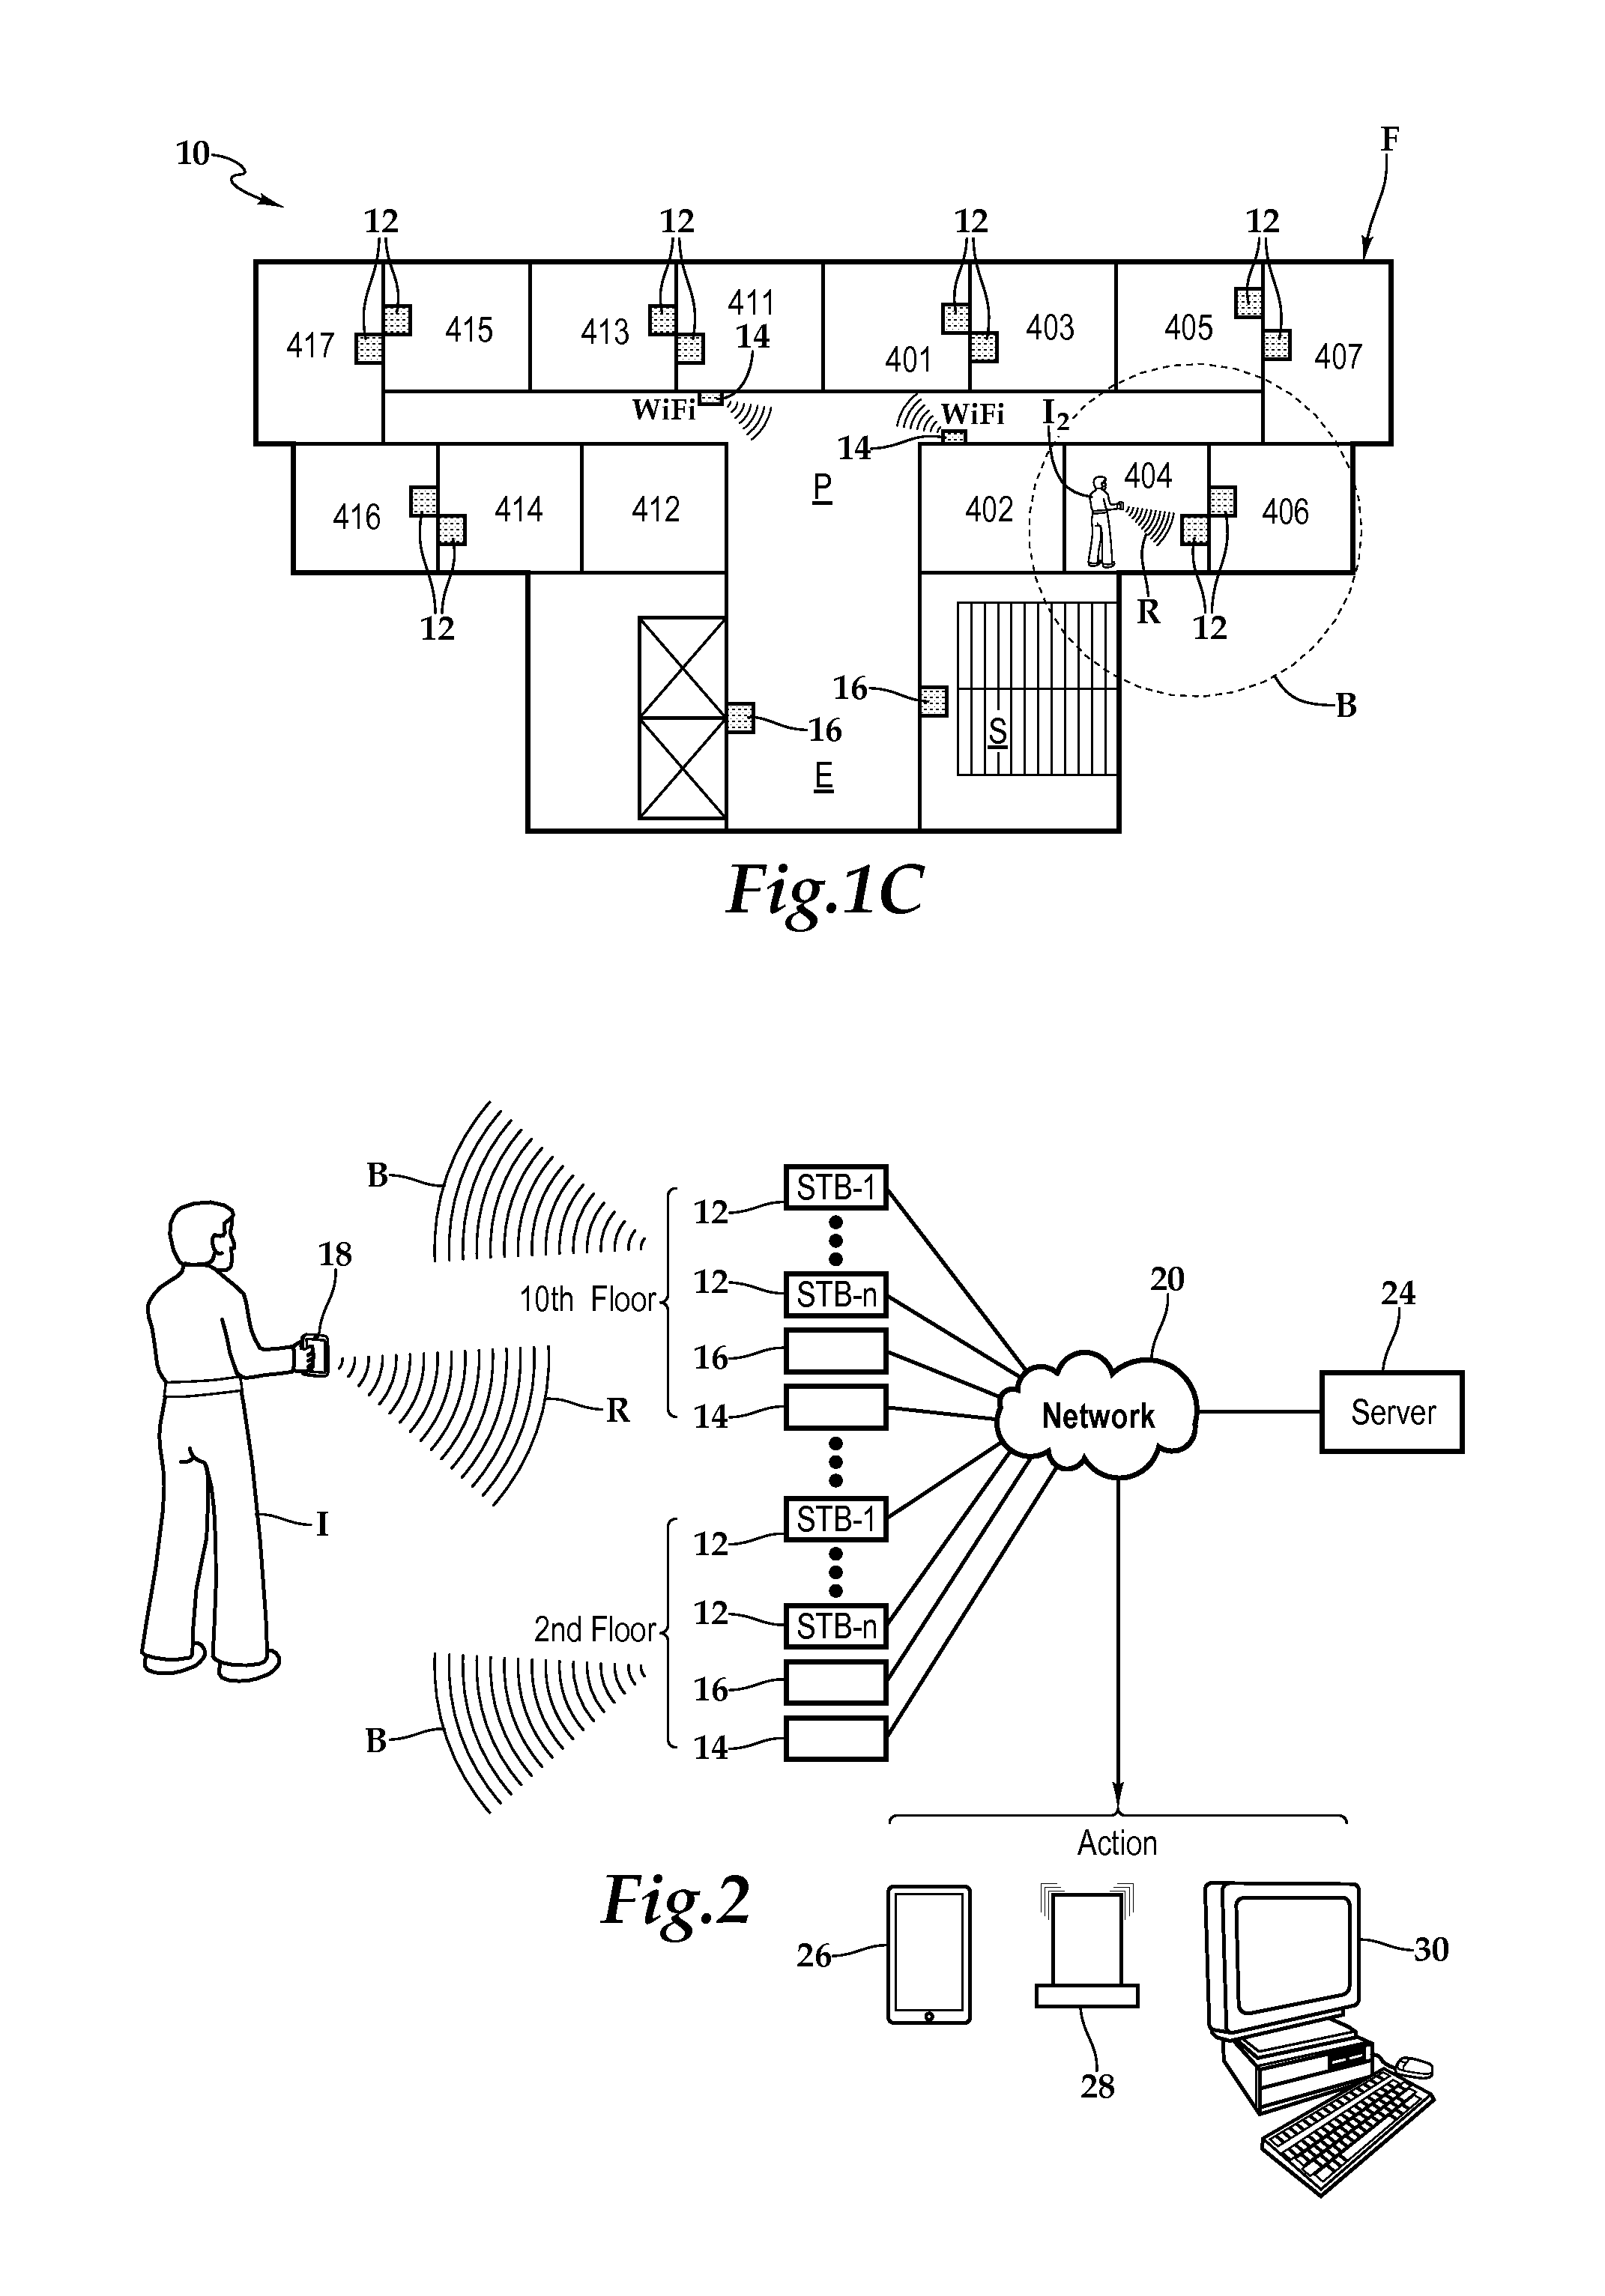 Set-top box, system and method for providing awareness in a hospitality environment